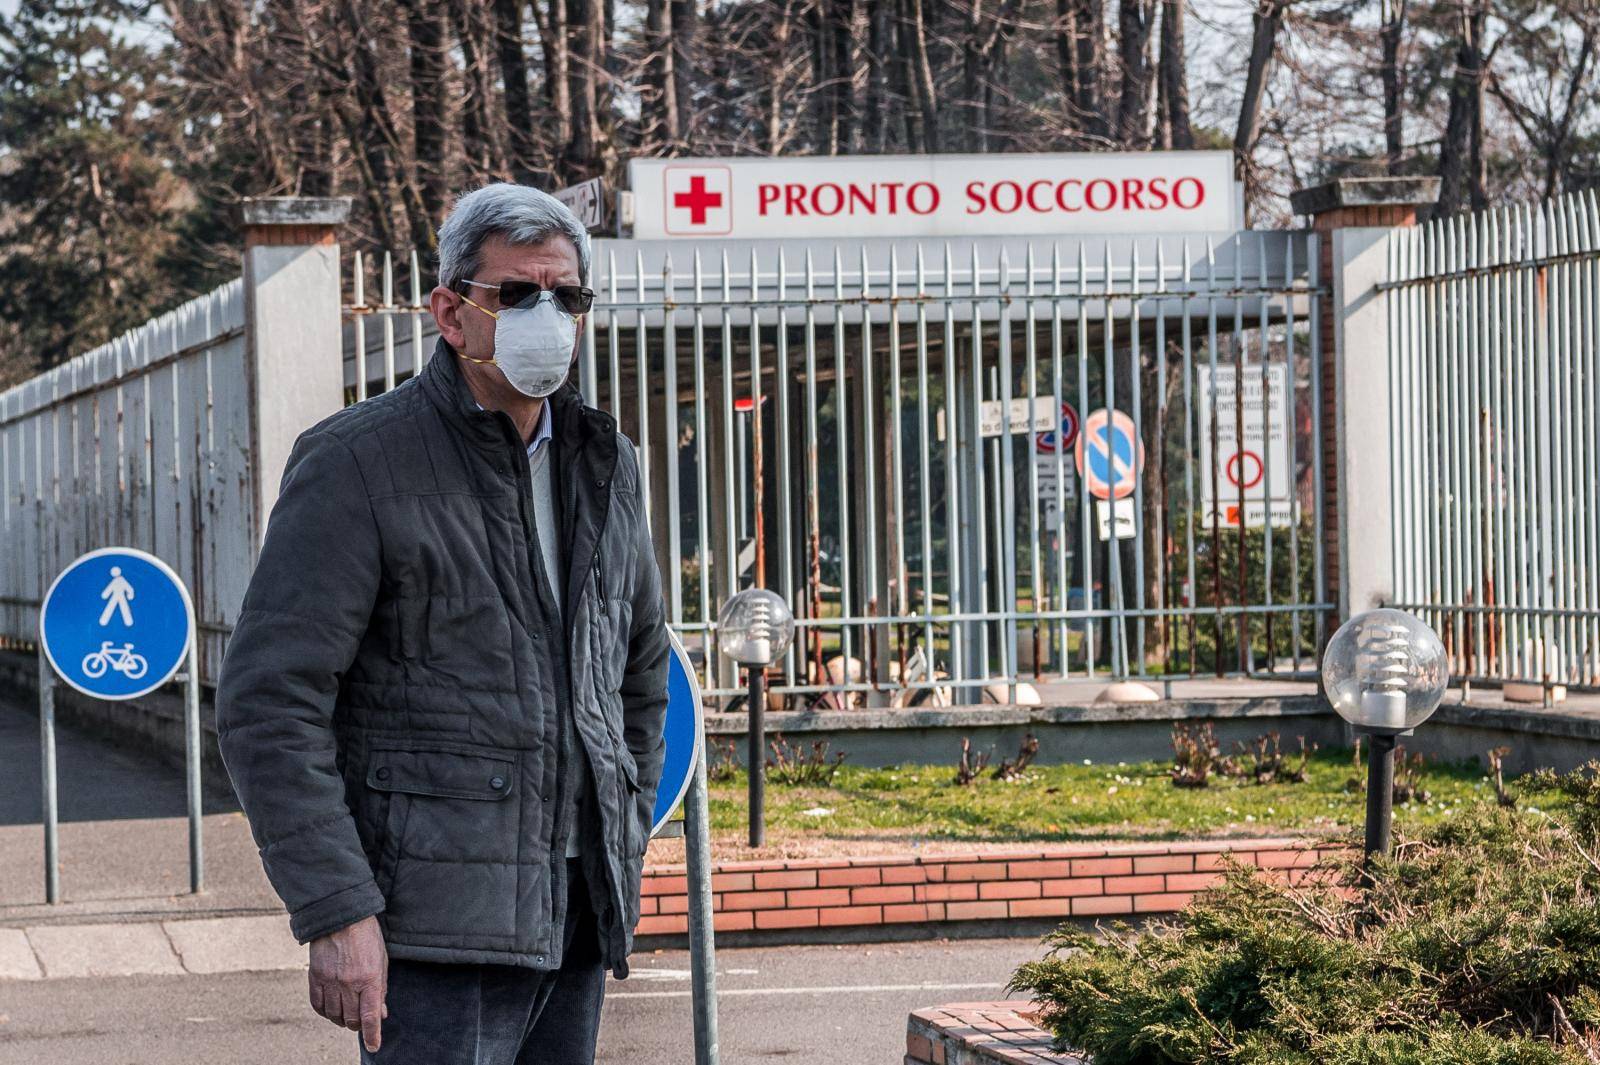 Codogno. Corona Virus Covid-19 emergency in Codogno closed shops and people with masks